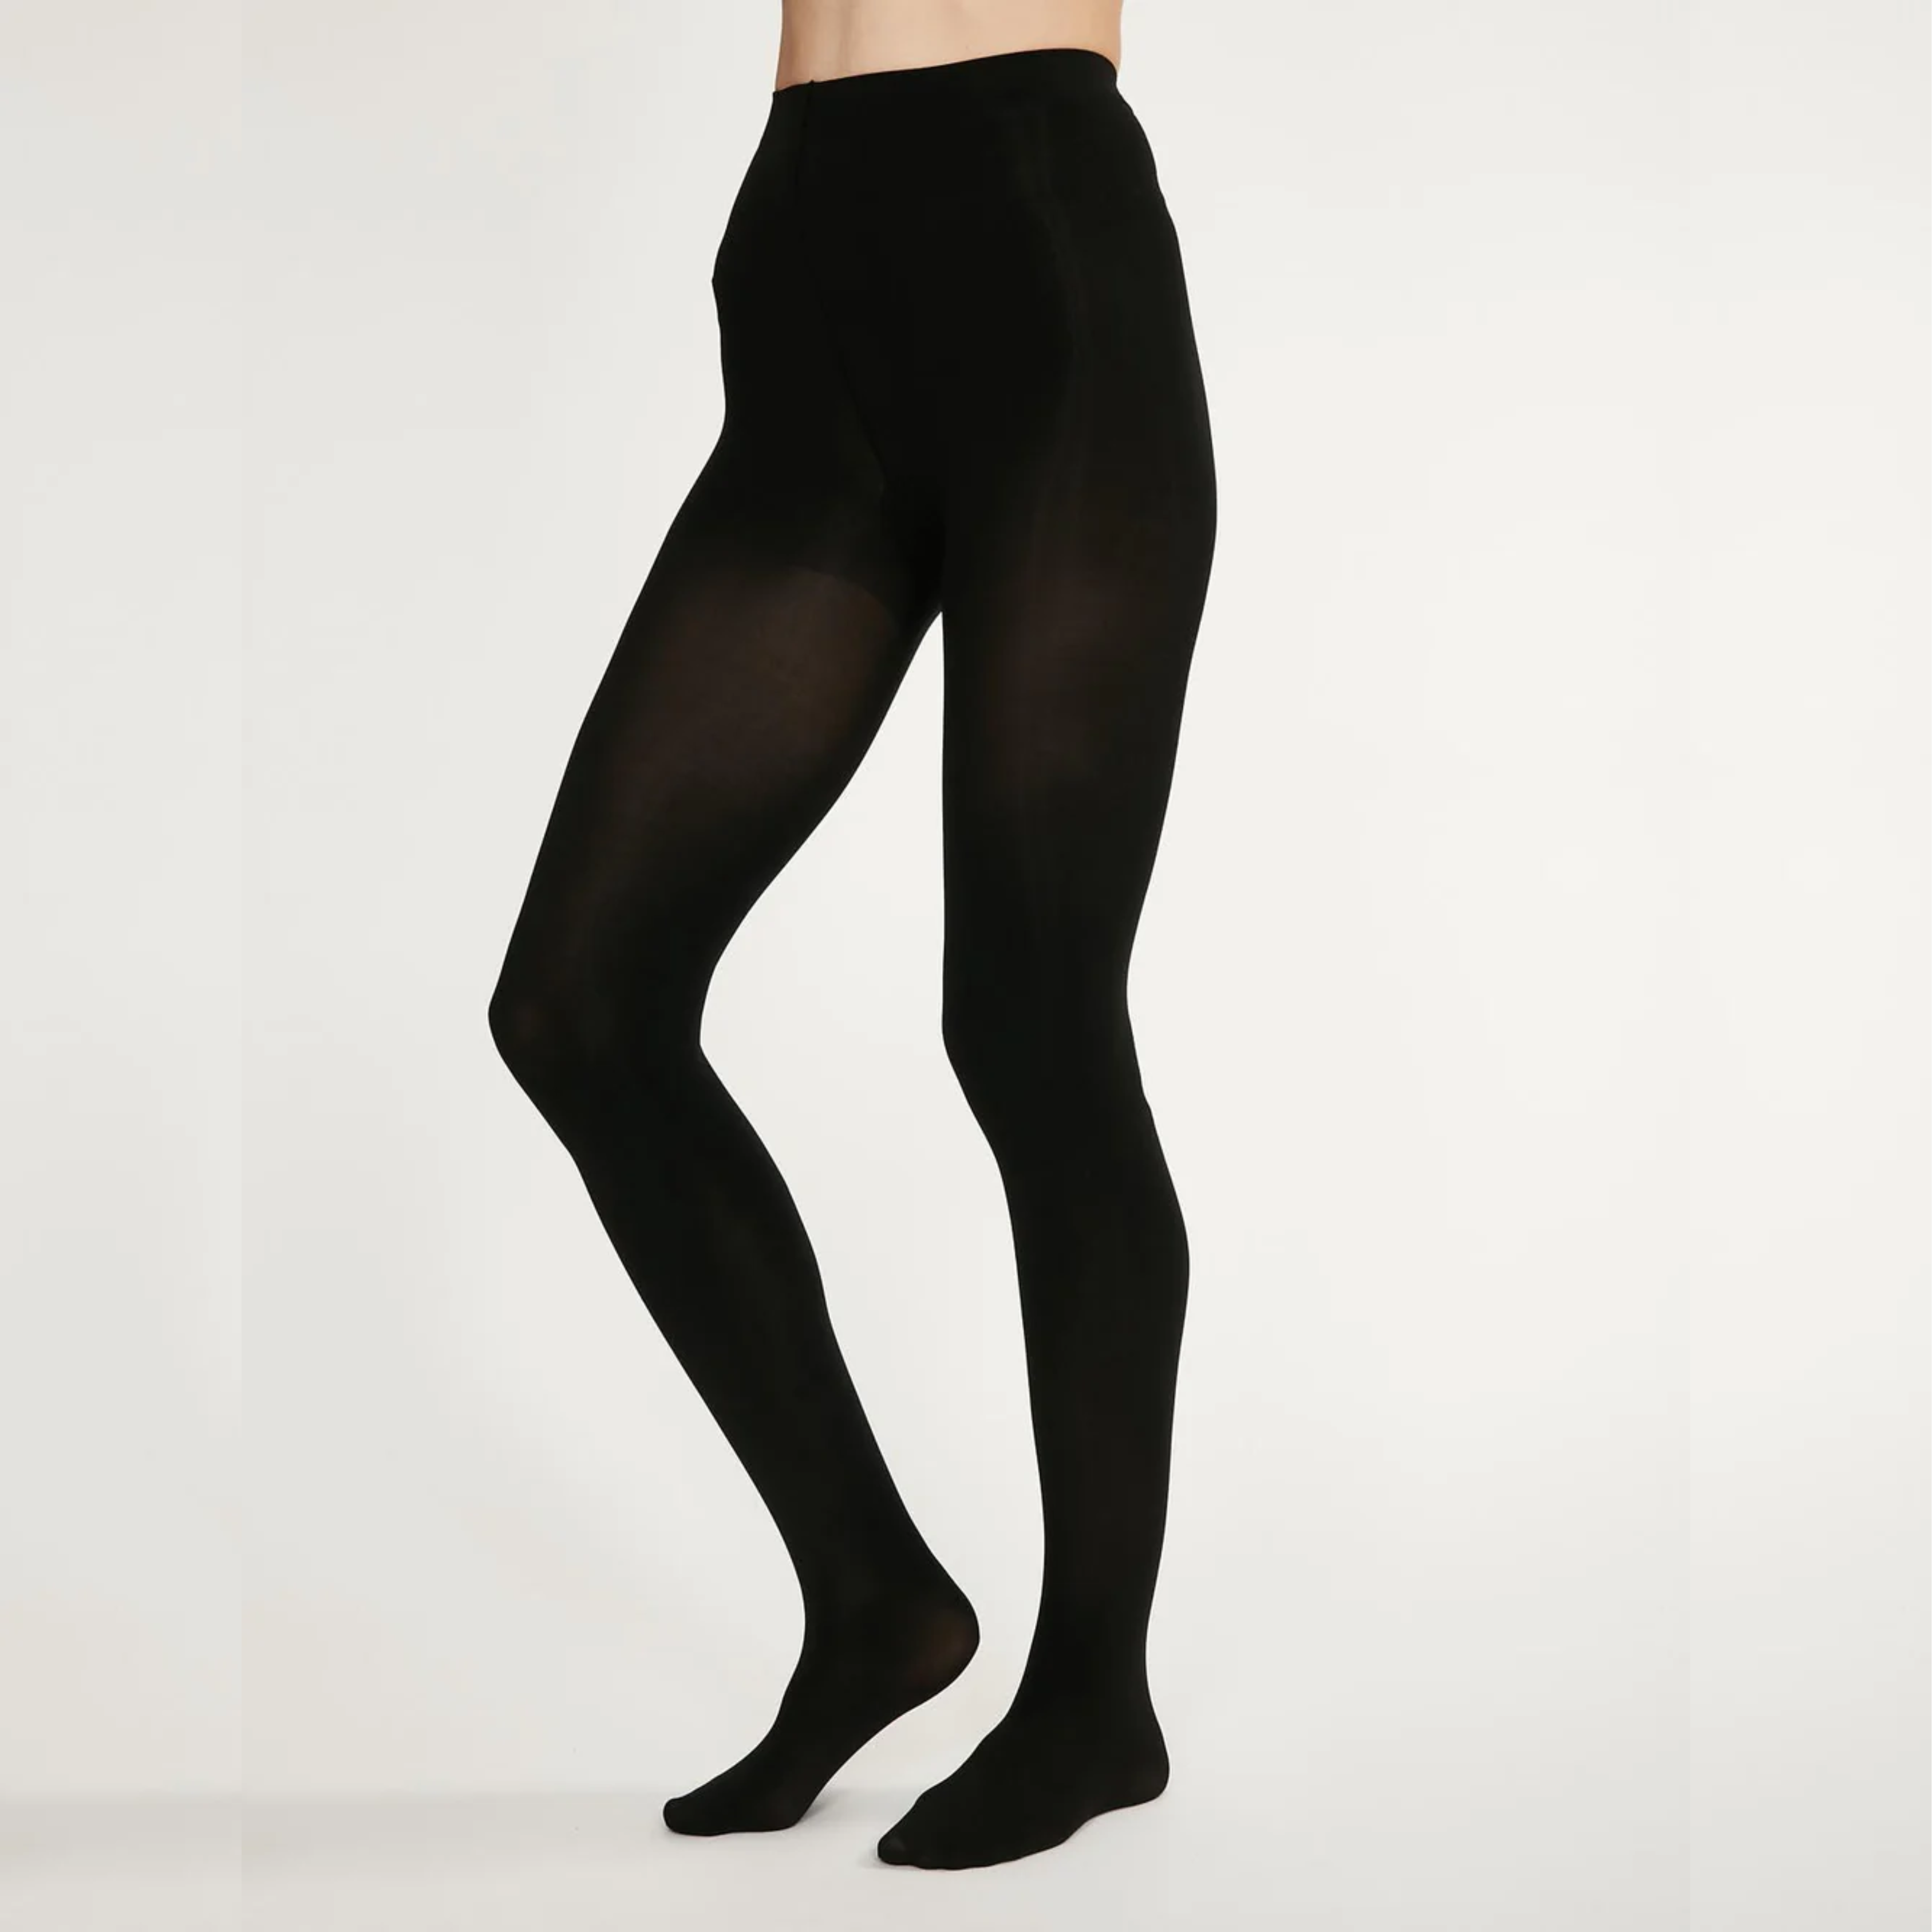 Recycled Nylon Essentials Tights (Women's) - 0